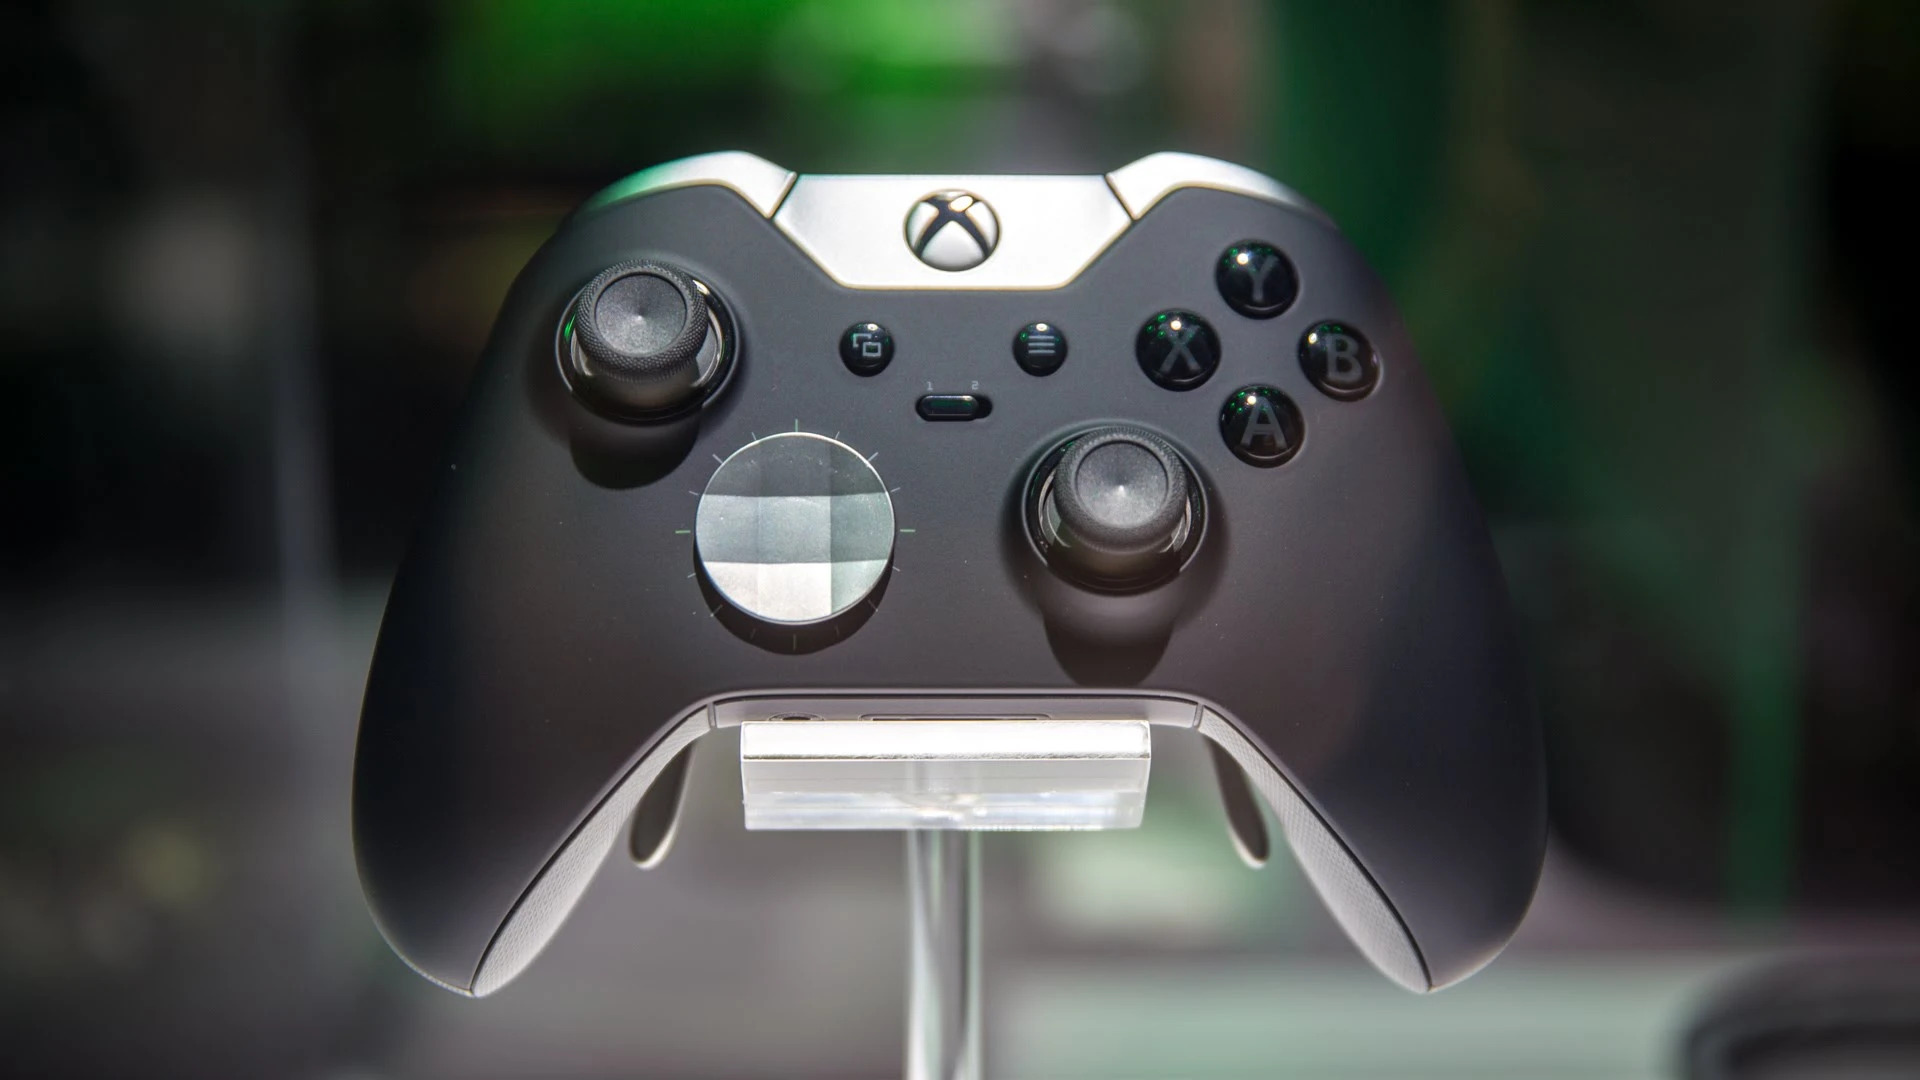 Are expensive Pro controllers like the Xbox Elite Series 2 really worth it?